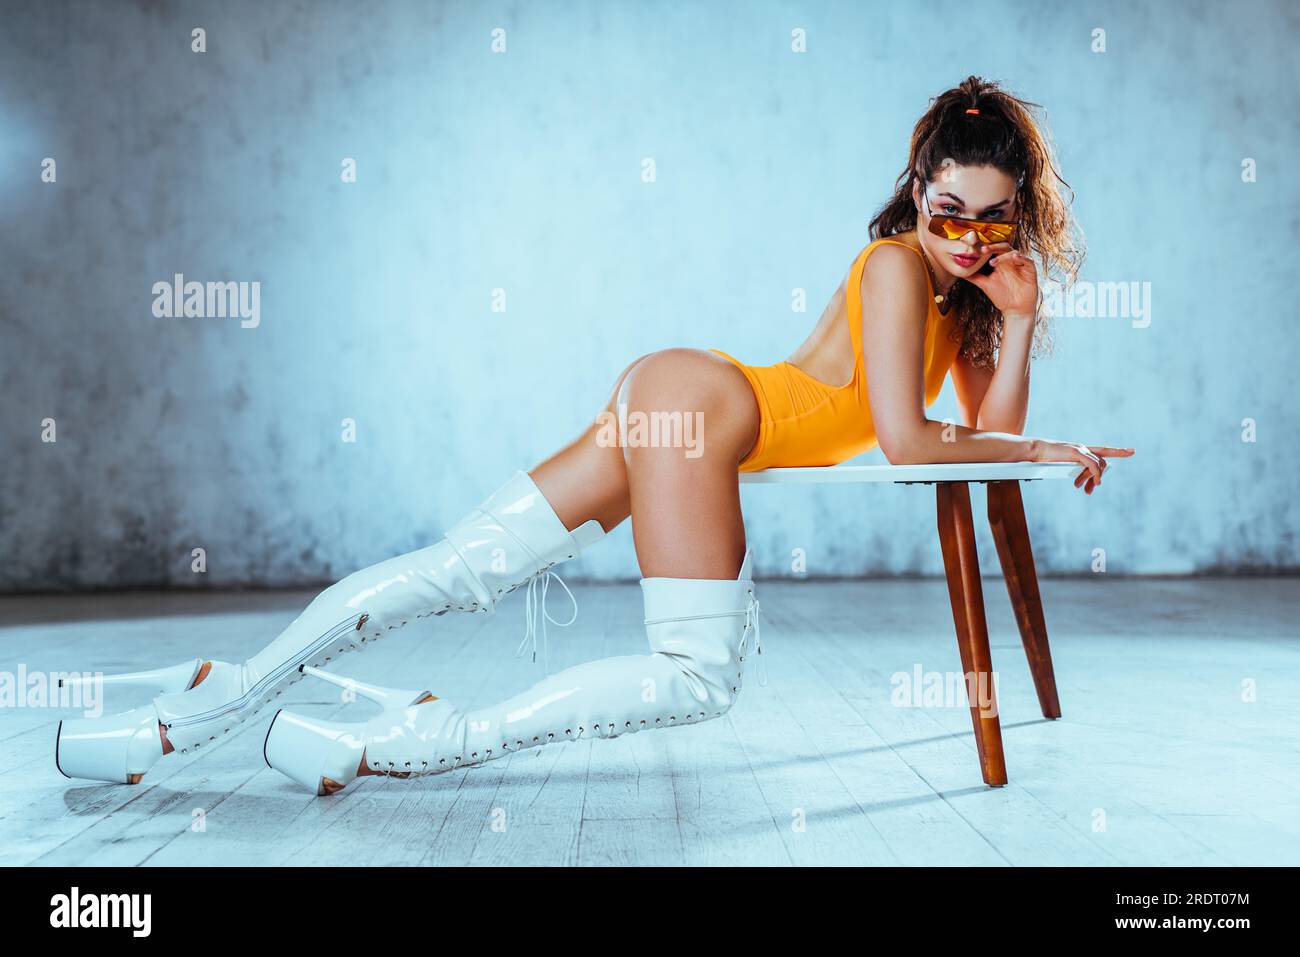 Young woman dancer posing in bright white interior with table Stock Photo